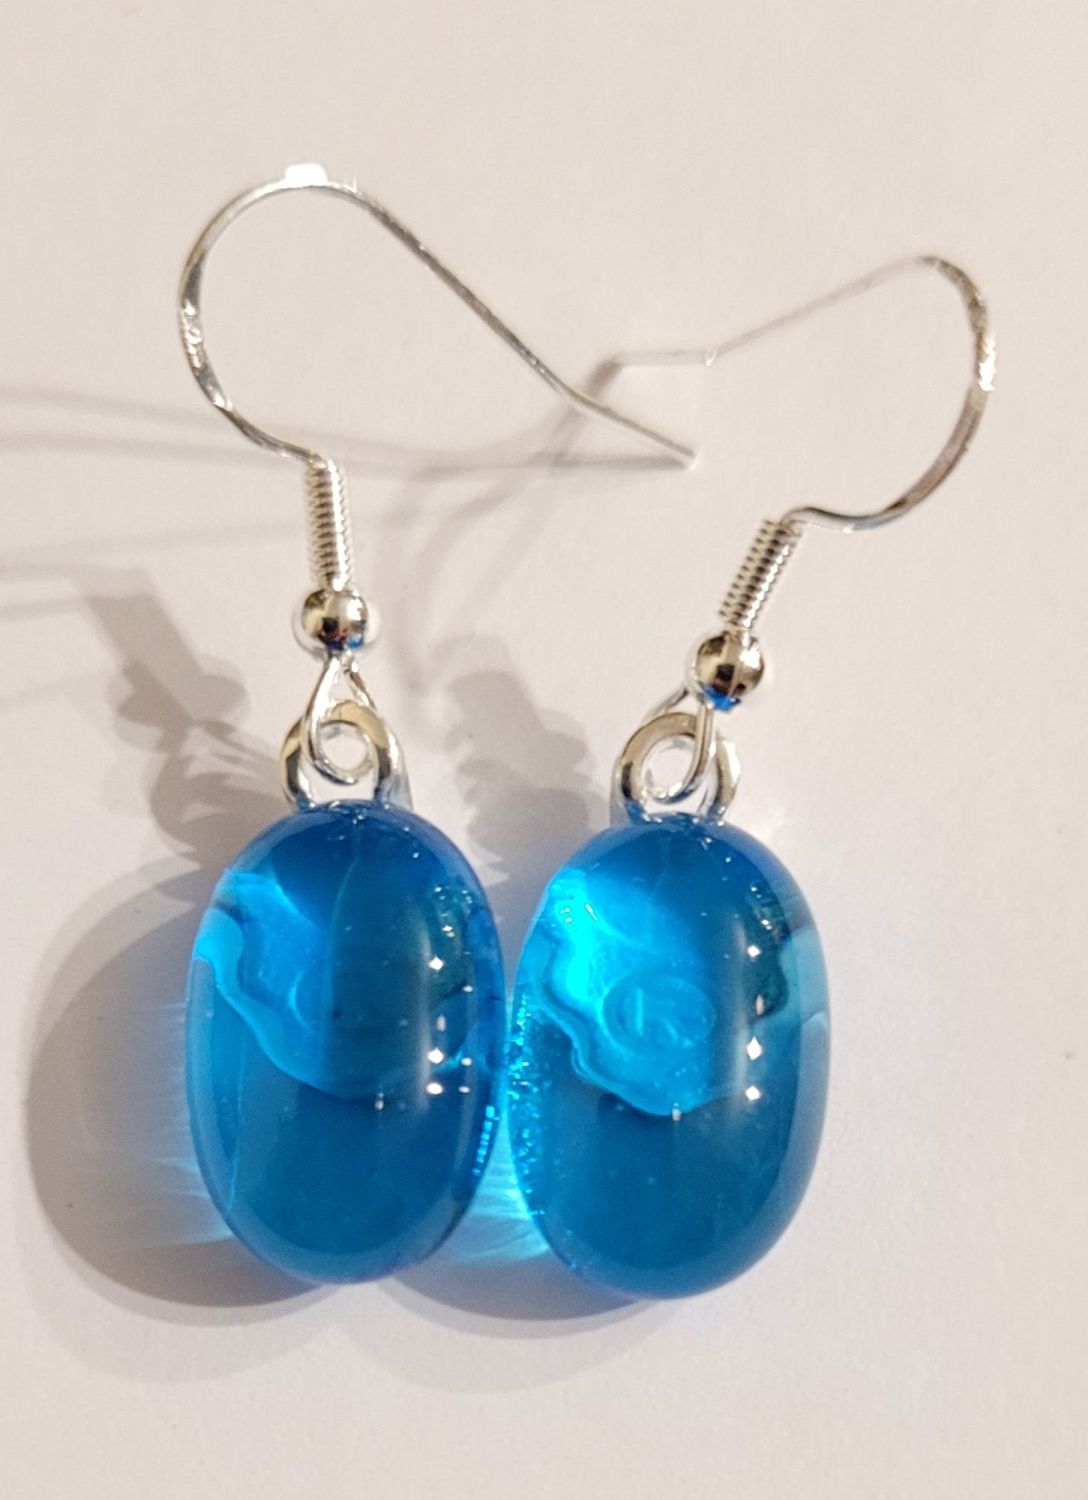 Turquoise blue transparent earrings